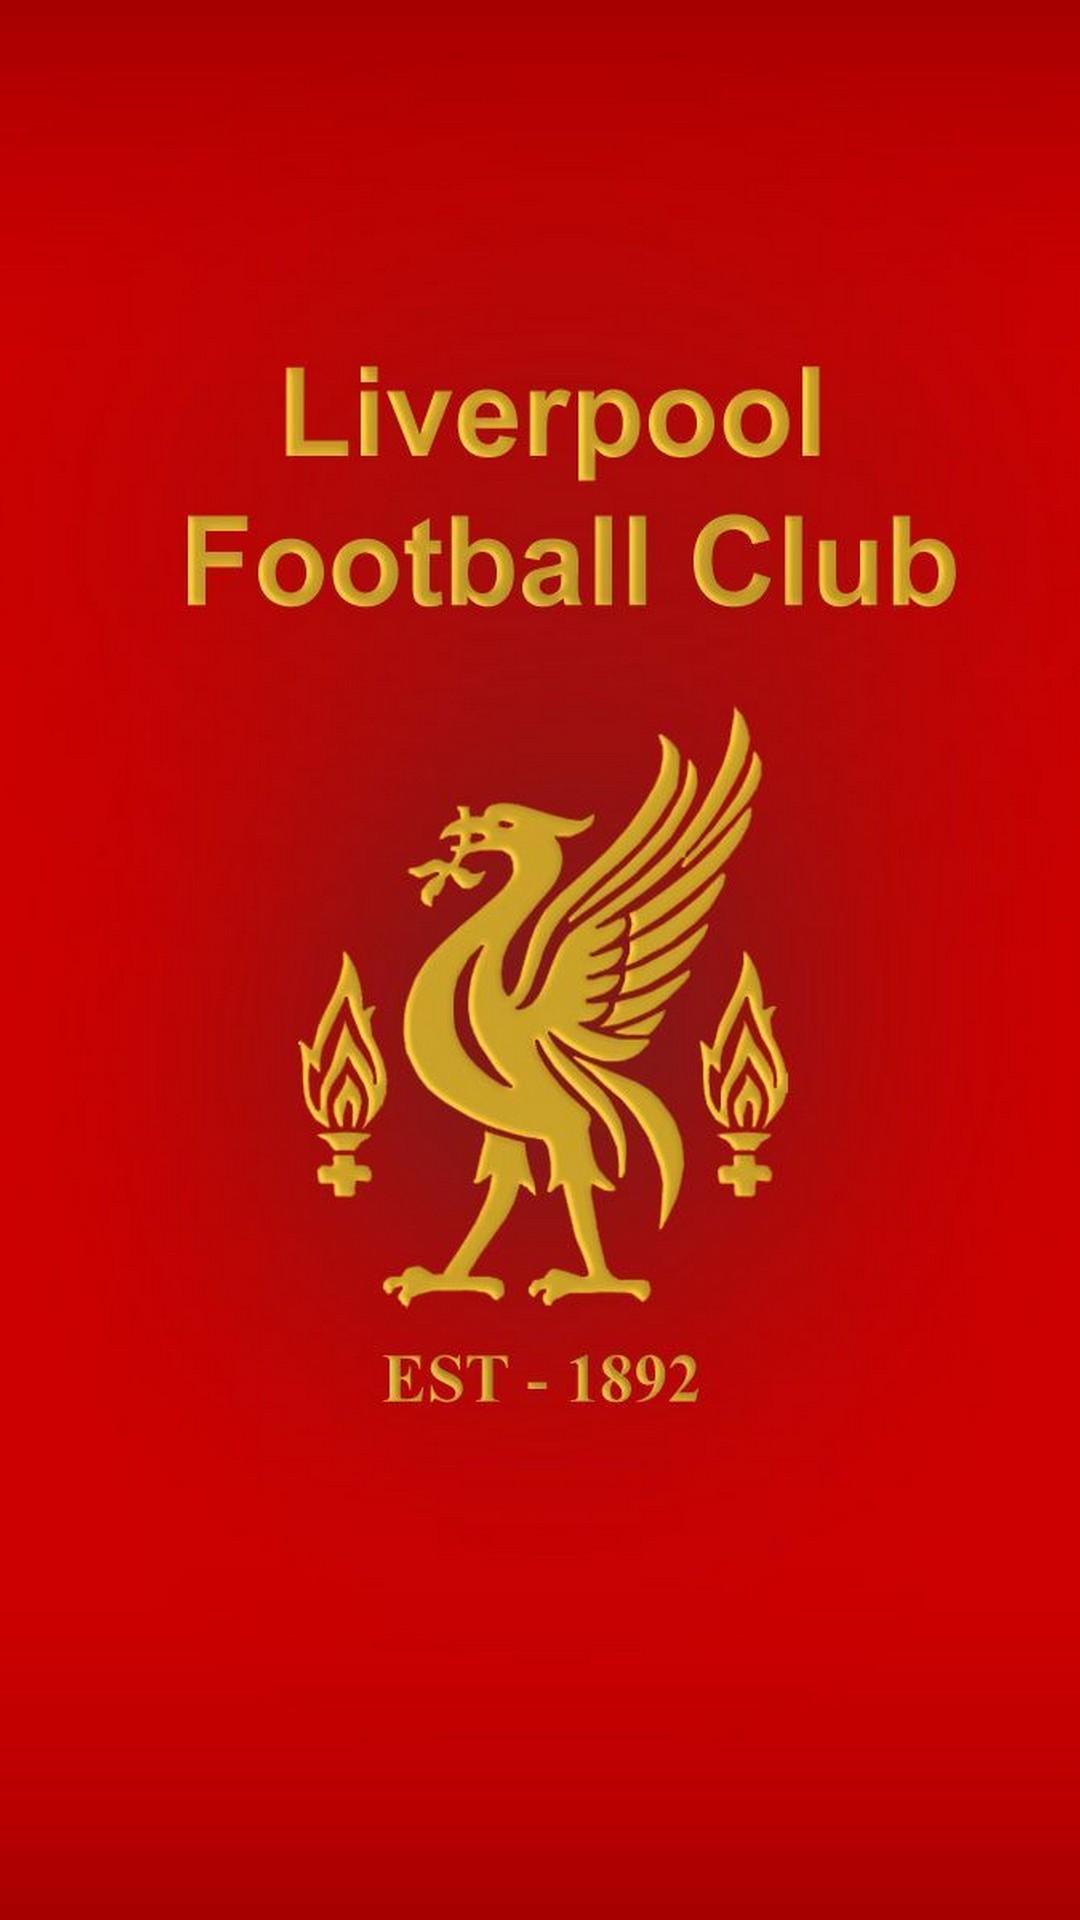 Wallpaper Liverpool Mobile with high-resolution 1080x1920 pixel. You can use this wallpaper for your Desktop Computers, Mac Screensavers, Windows Backgrounds, iPhone Wallpapers, Tablet or Android Lock screen and another Mobile device